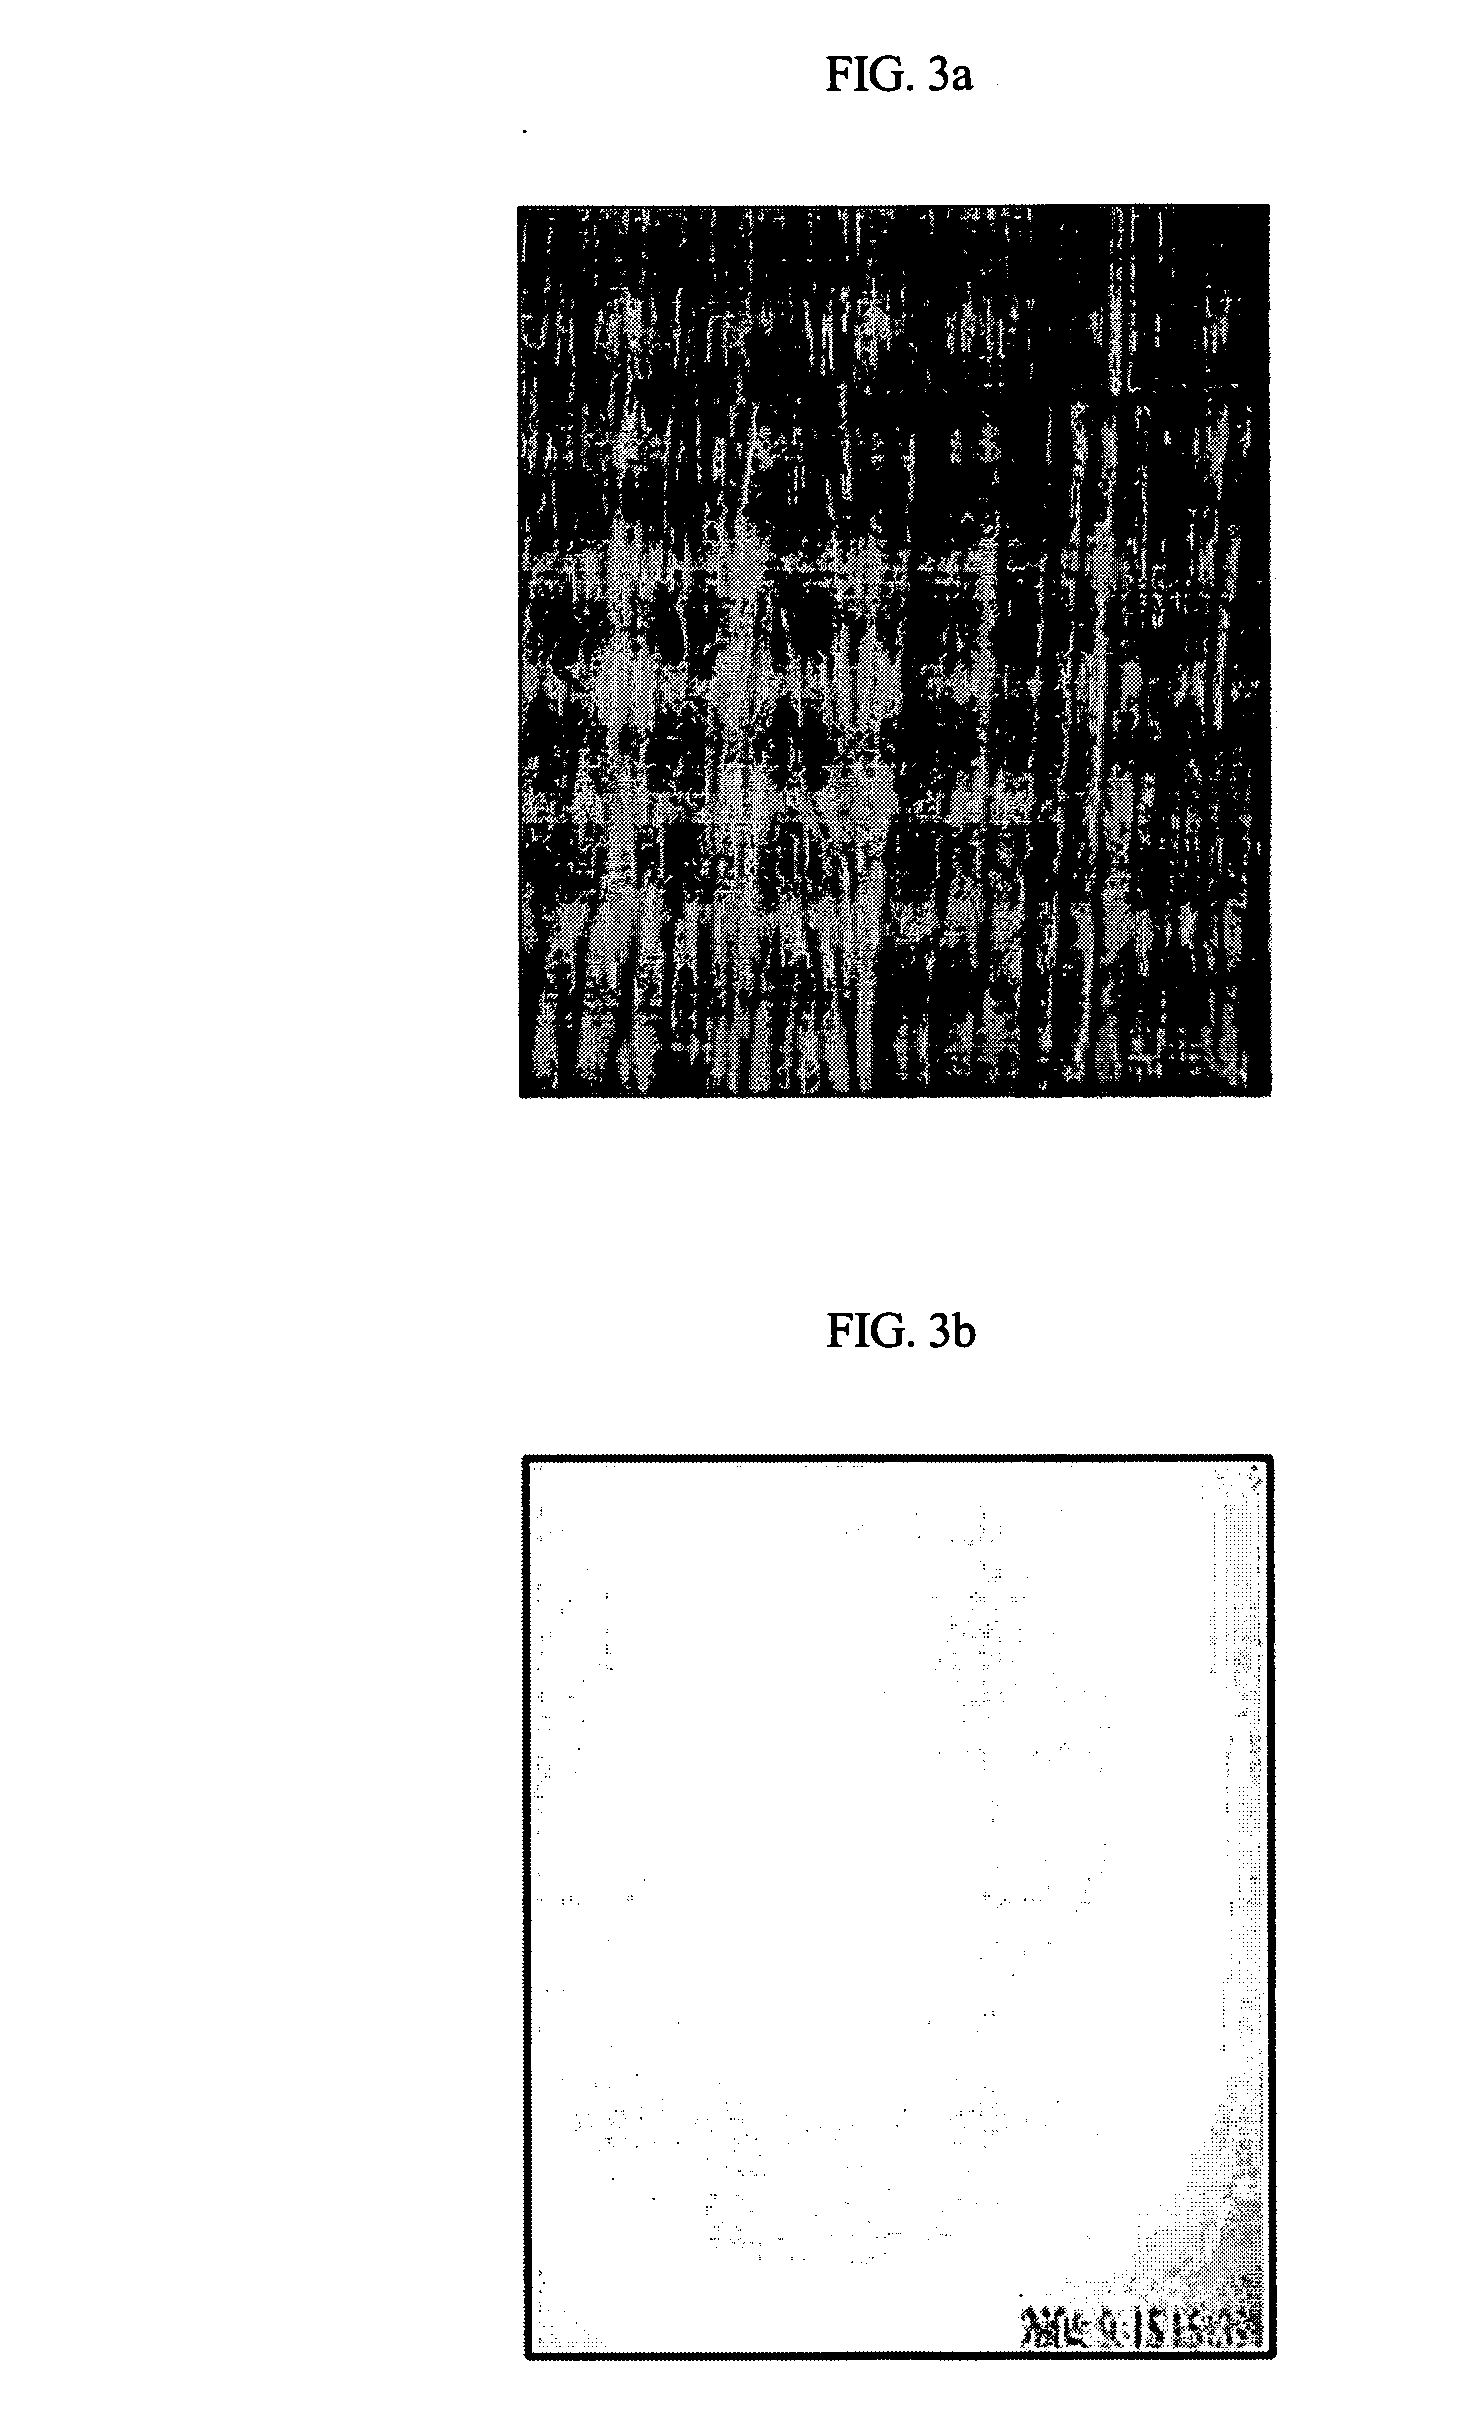 Non-PVC flooring made of thermo plastic elastomer and method for producing the same